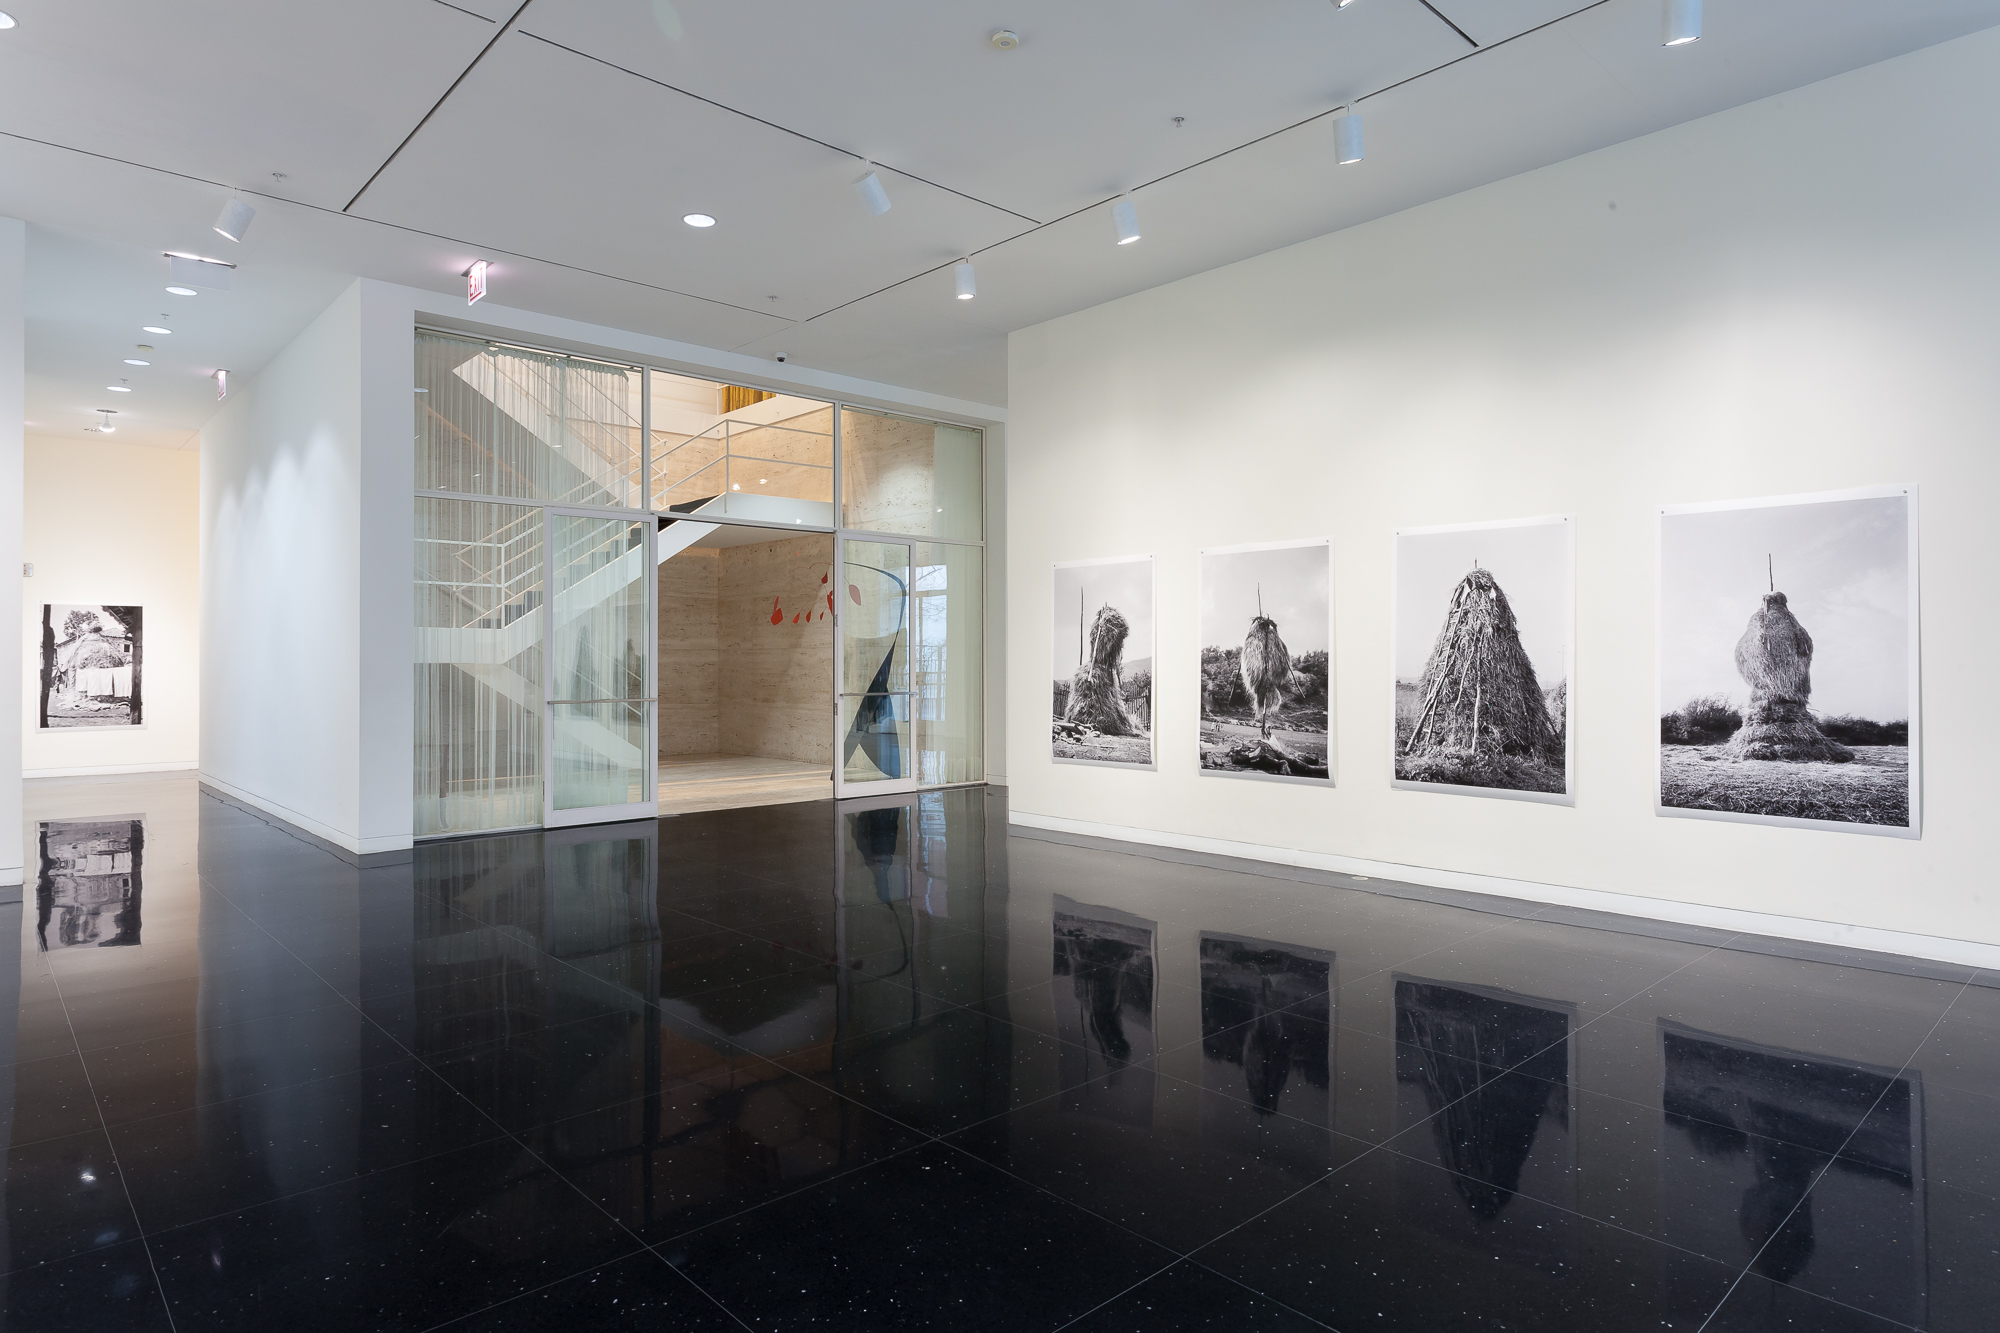 A freestanding white gallery wall with four life-size black and white photos of haystacks shaped into organic, animal-like or humanoid figures. To the left of the wall, the white Mies van der Rohe-designed stairwell is visible.